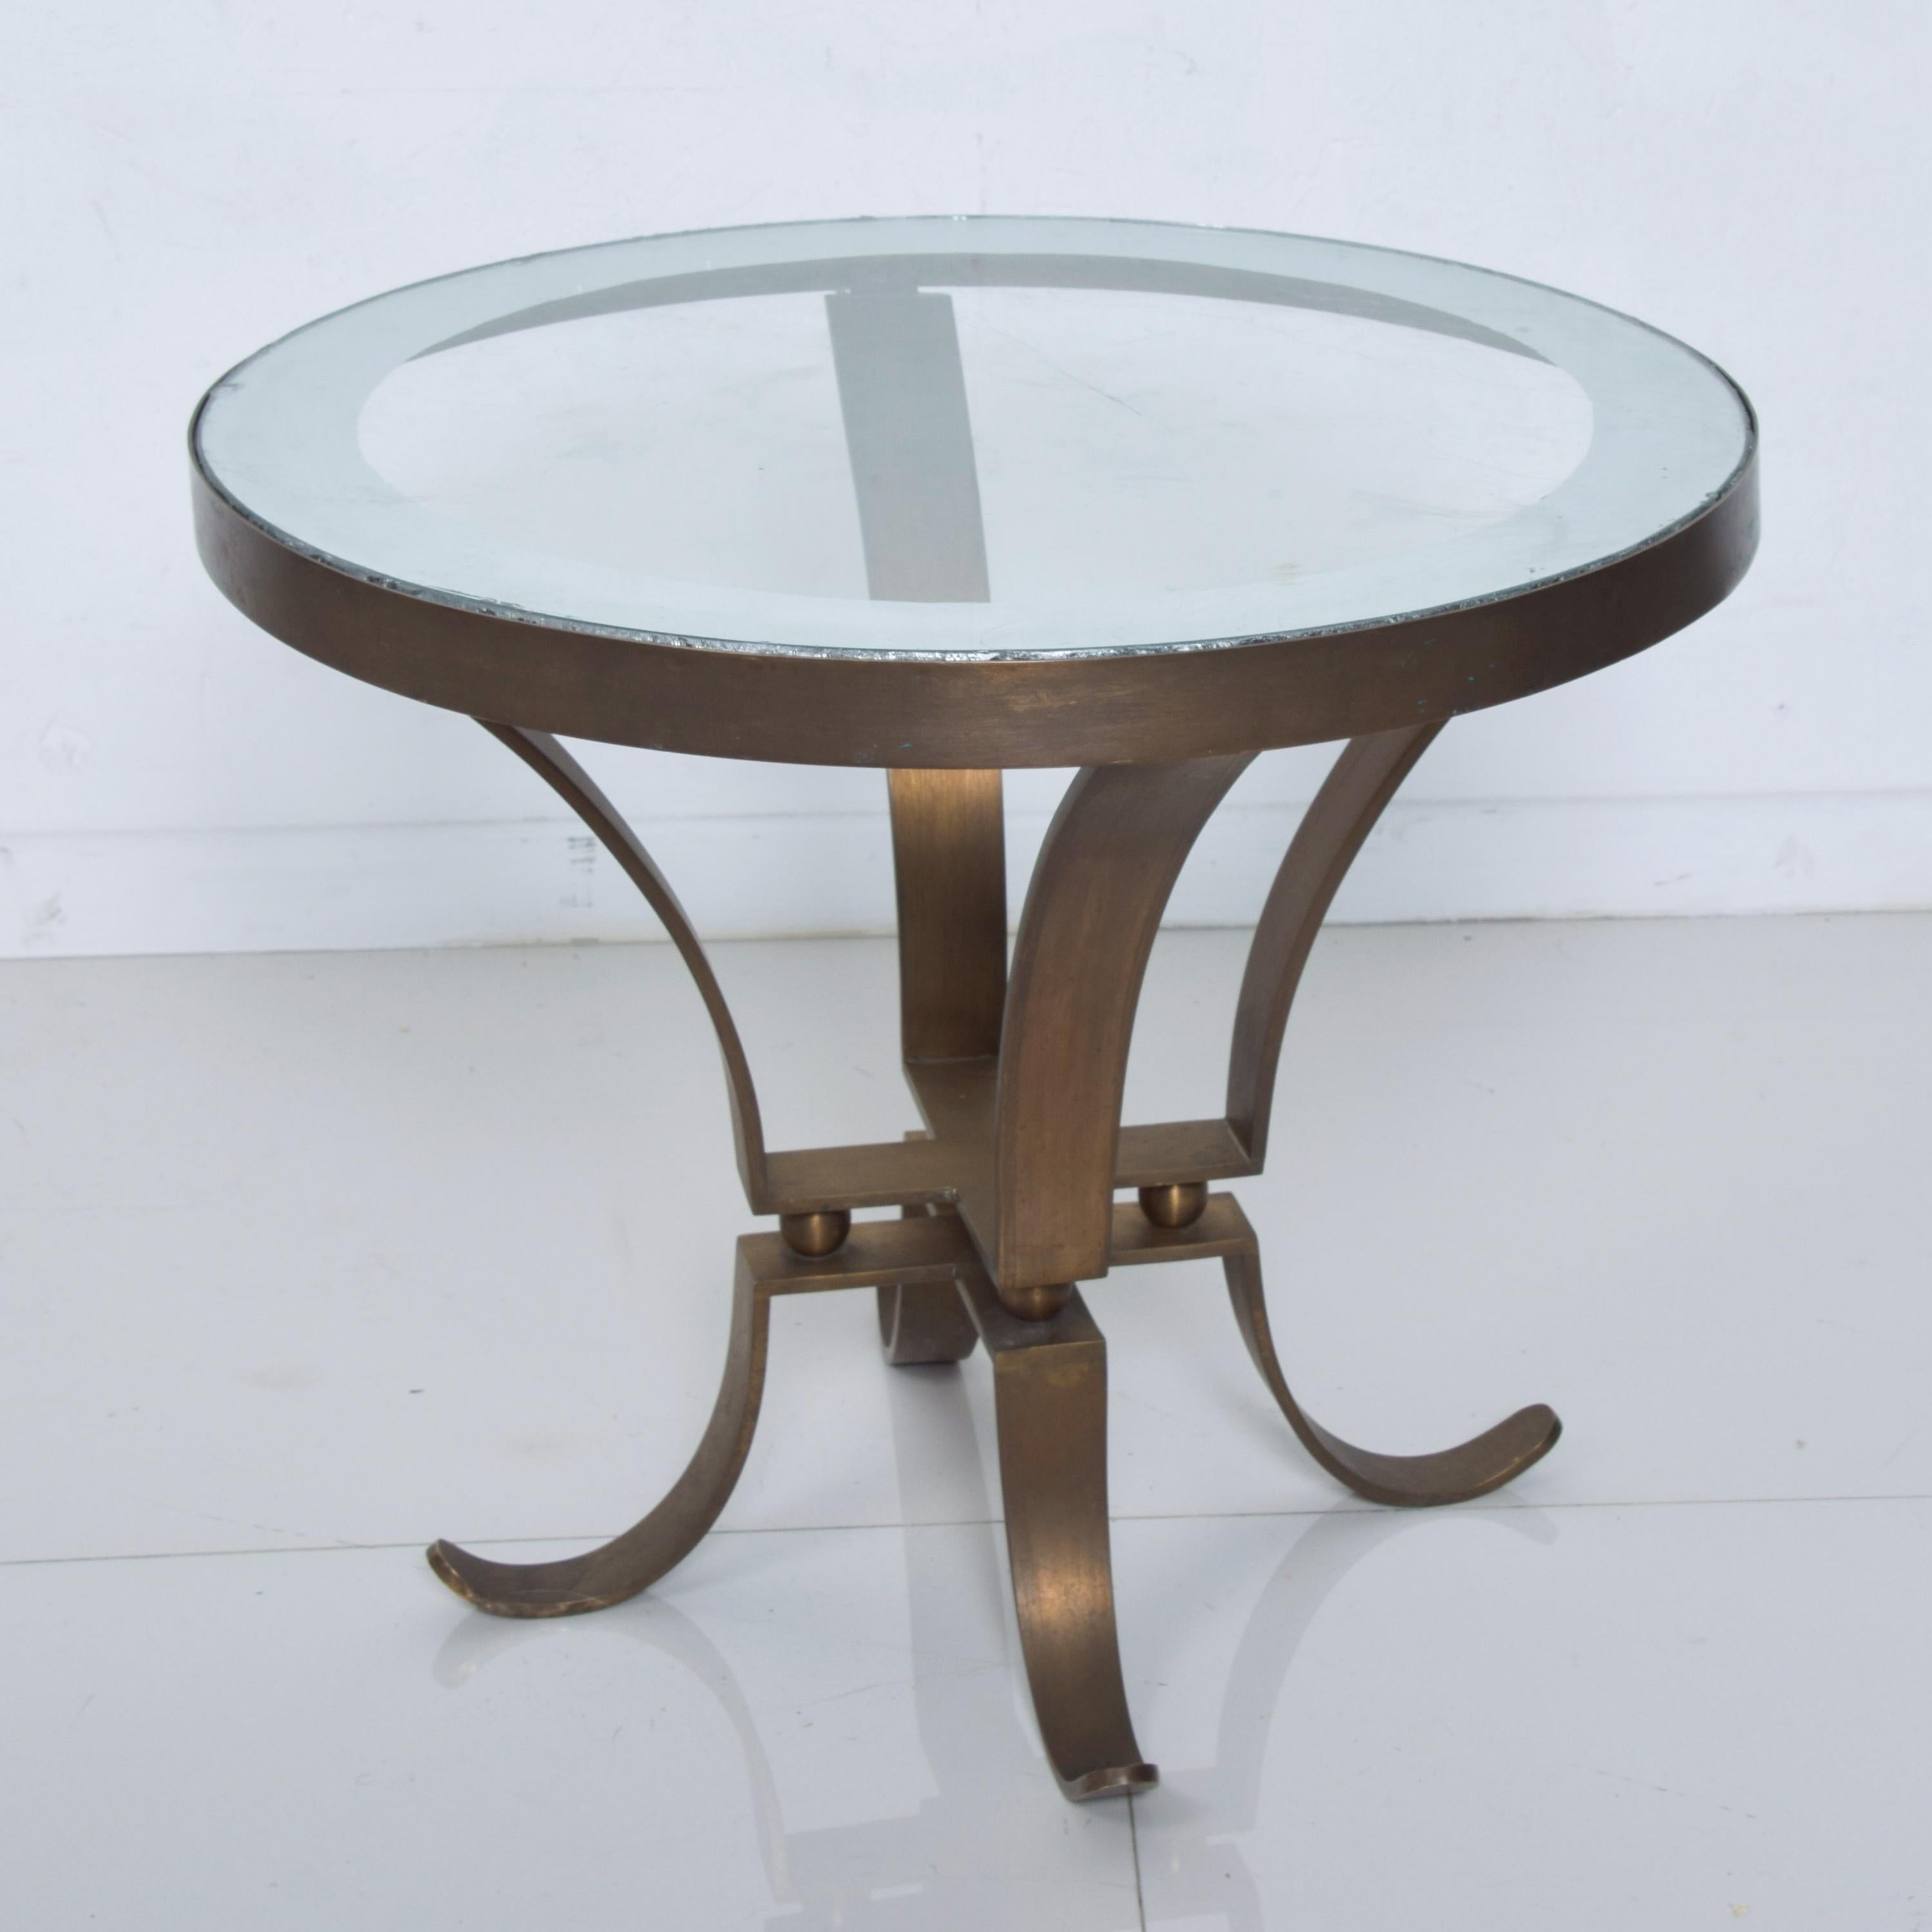 Arturo Pani sculptural bronze vintage side table Mexico Mid-Century Modern, 1950s

Lovely base providing a graceful presentation. 

Glass top with decorative band trim.

Dimensions: 16.25 height x 19.75